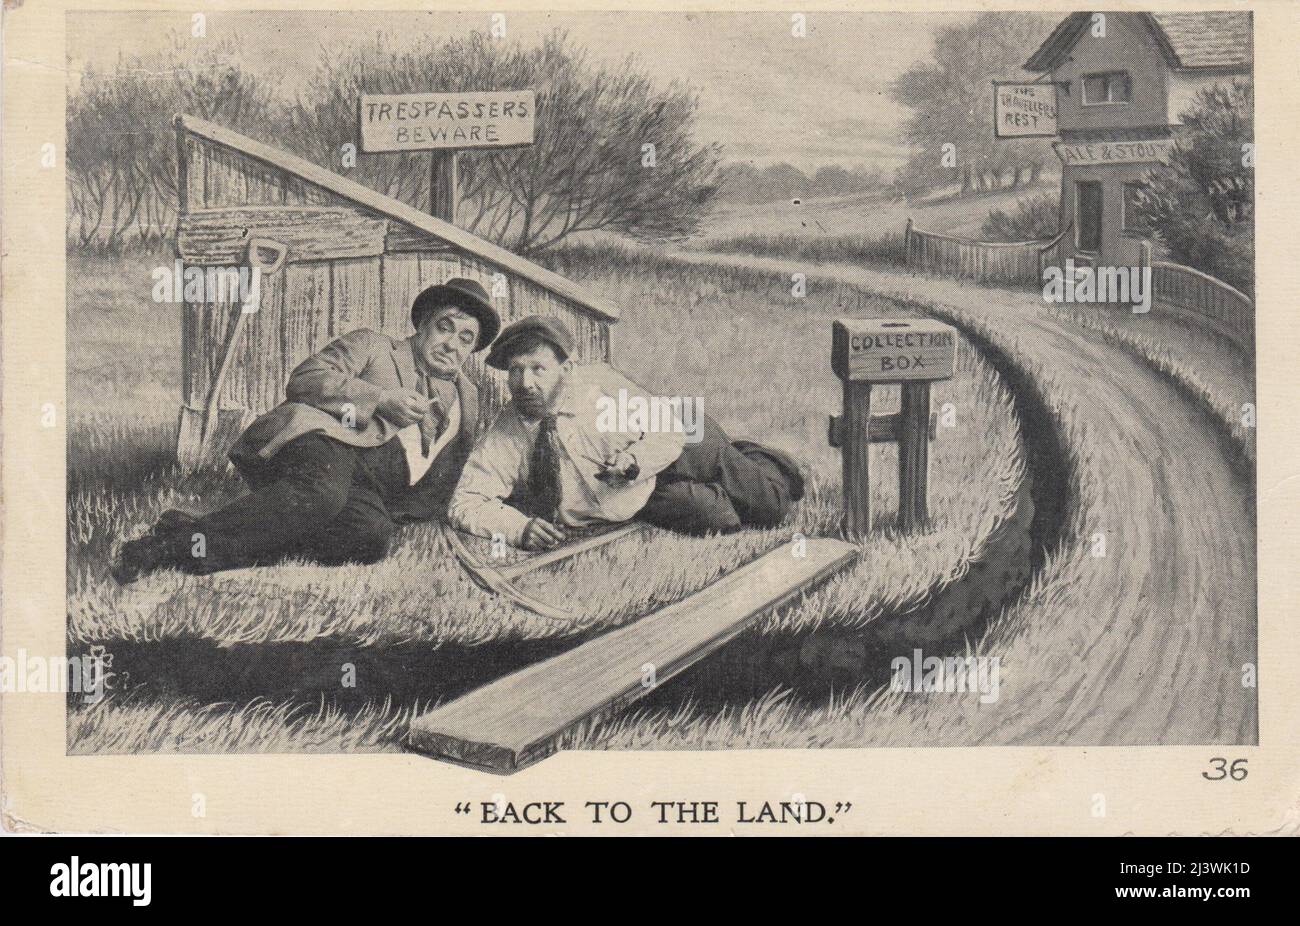 'Back to the land', 1900s. Cartoon showing two disreputable looking men smoking pipes whilst lying on a piece of grass next to a small shed. They have a collection box for donations, a pick and shovel and a sign saying 'Trespassers beware'. A pub called 'The Travellers Rest' is in the background. This is a hostile view of the 'Back to the land' movement of the first decade of the 20th century, which included campaigns for land reform, occupation of land with the intention that it could be cultivated by unemployed workers, and 'hunger marches' of unemployed men looking for work Stock Photo